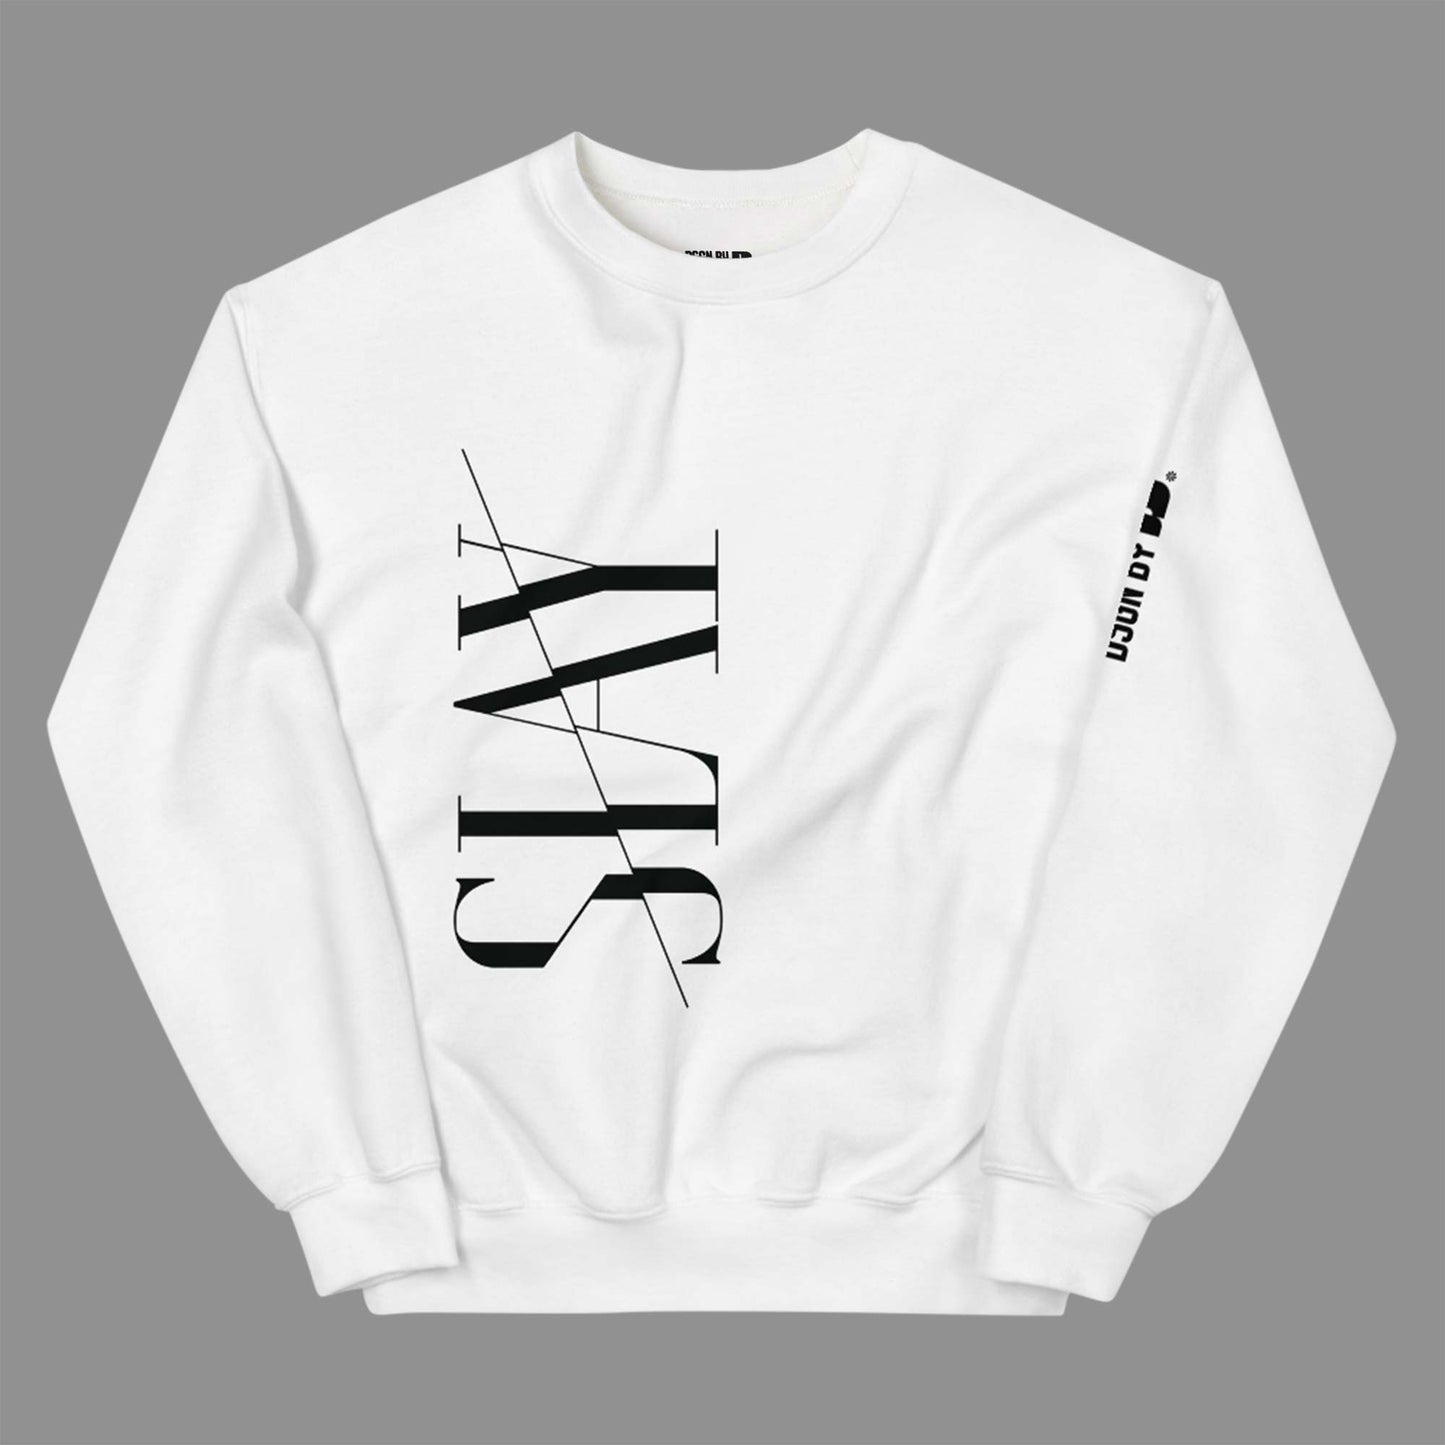 A white unisex crew neck sweatshirt with the work SLAY printed on the front.